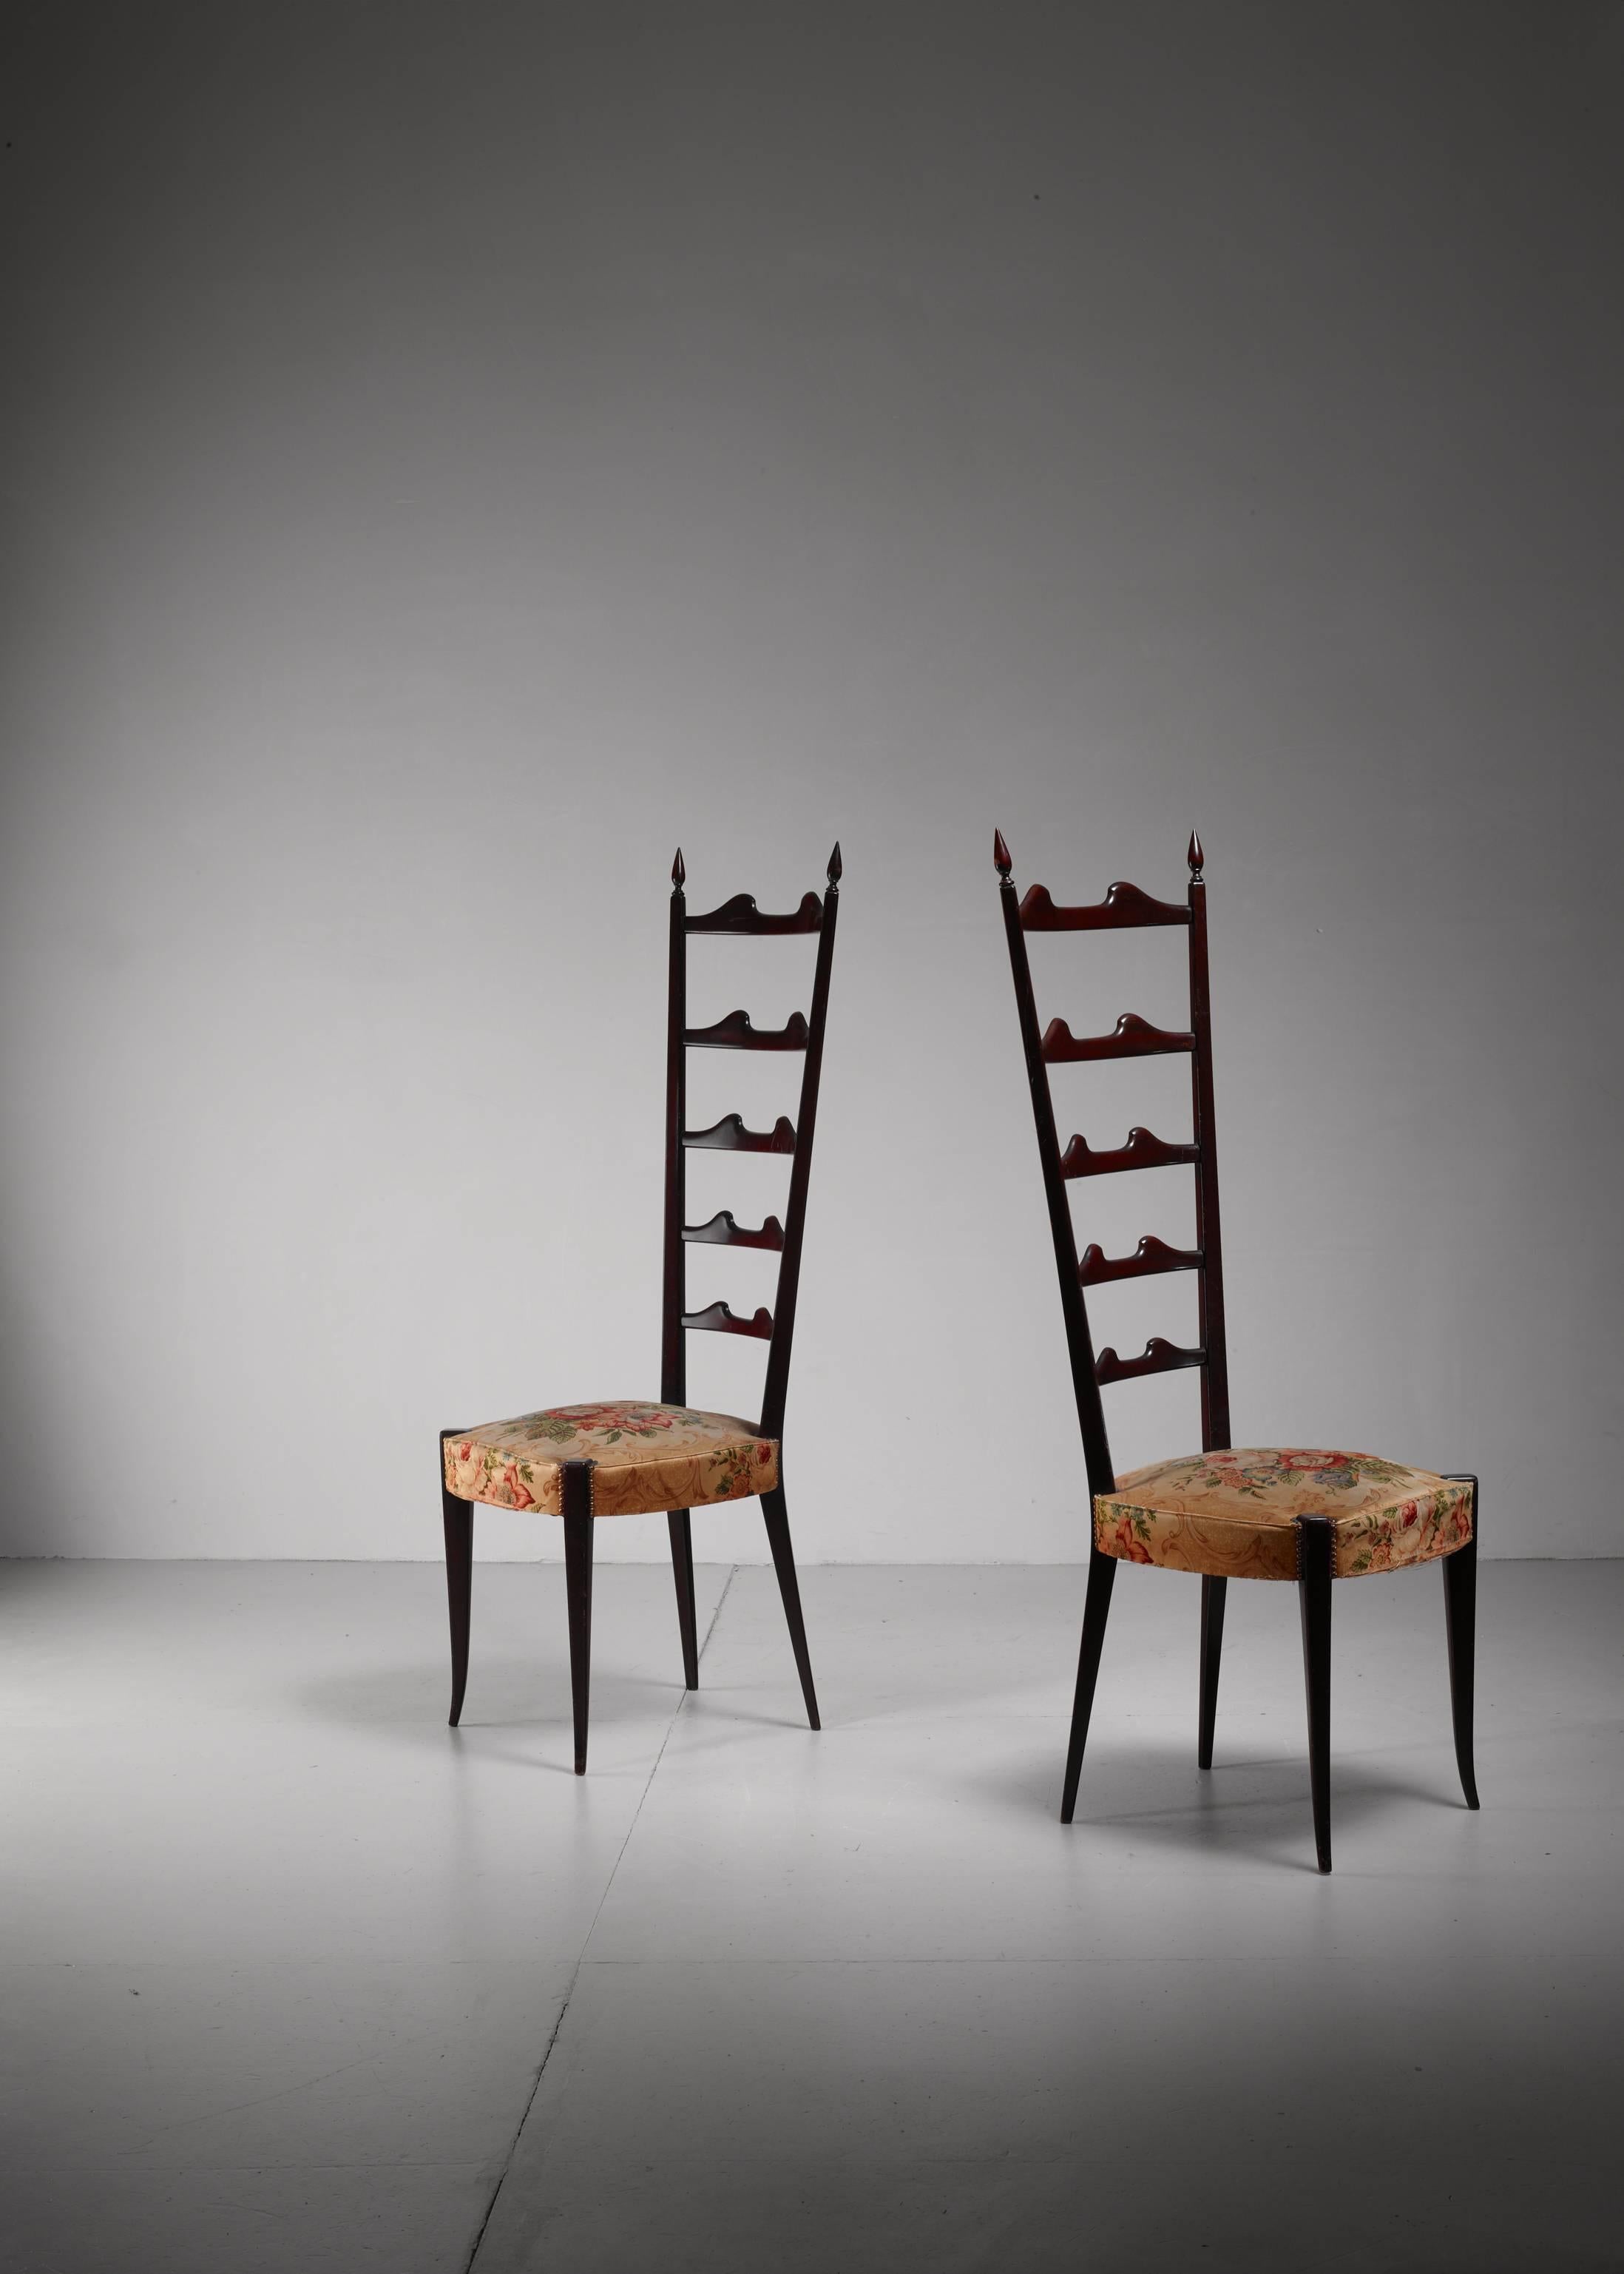 A pair of Chiavari chairs of ebonized mahogany with a high backrest, attributed to Paolo Buffa for Marelli and Colico. The chairs have a floral fabric seating.

The slim and light chairs from Chiavari date back to 1807 and were the inspiration for